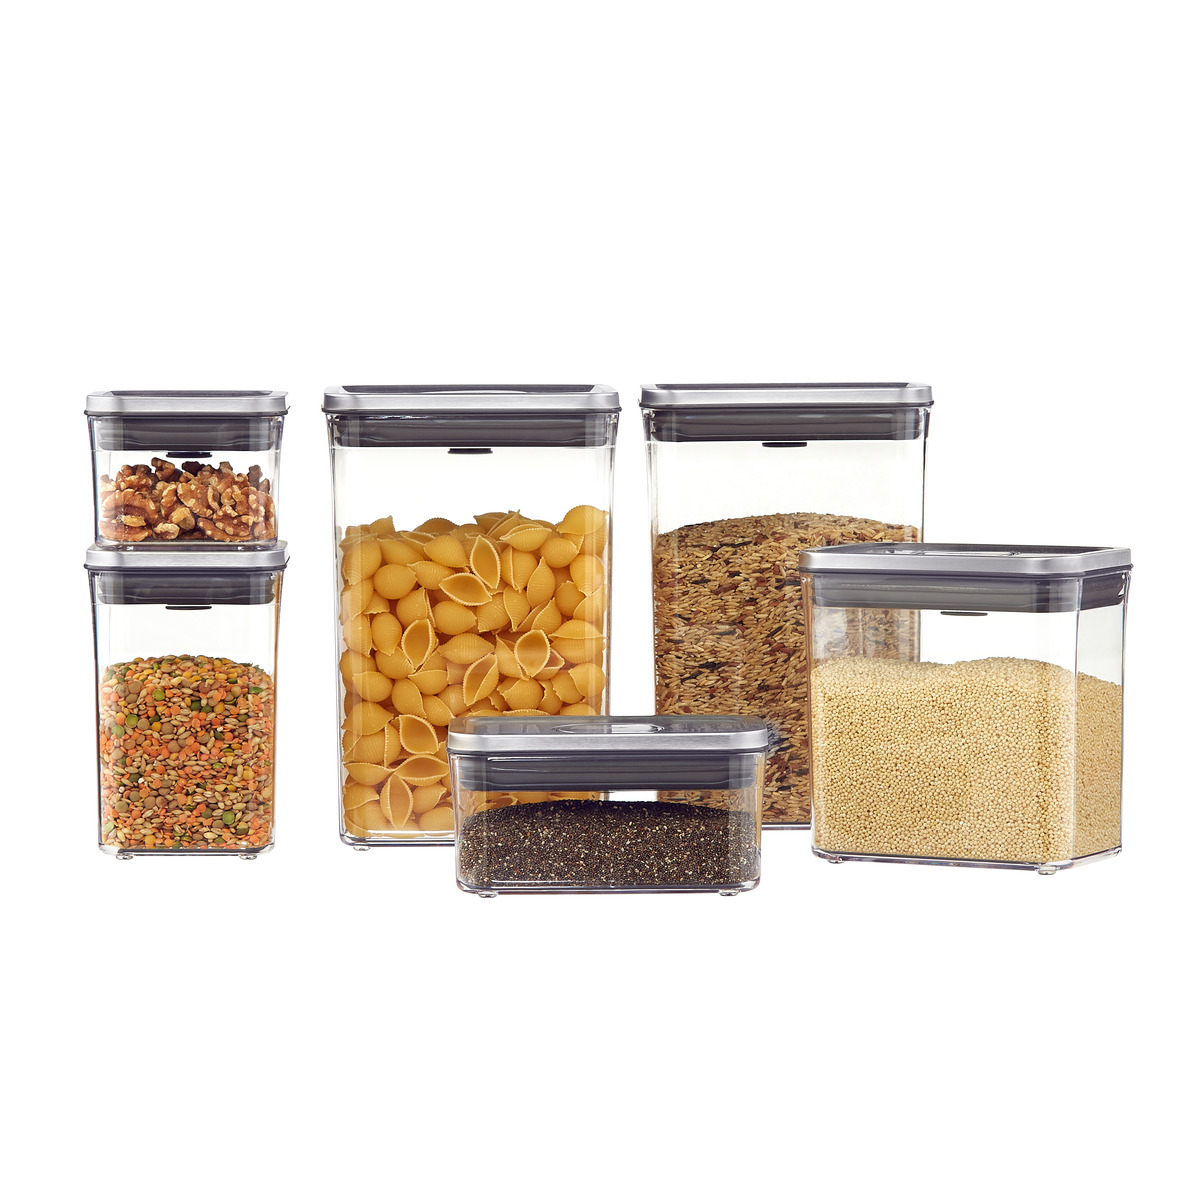 https://www.containerstore.com/catalogimages/414367/10083017_OXO_steel_pop_container_set.jpg